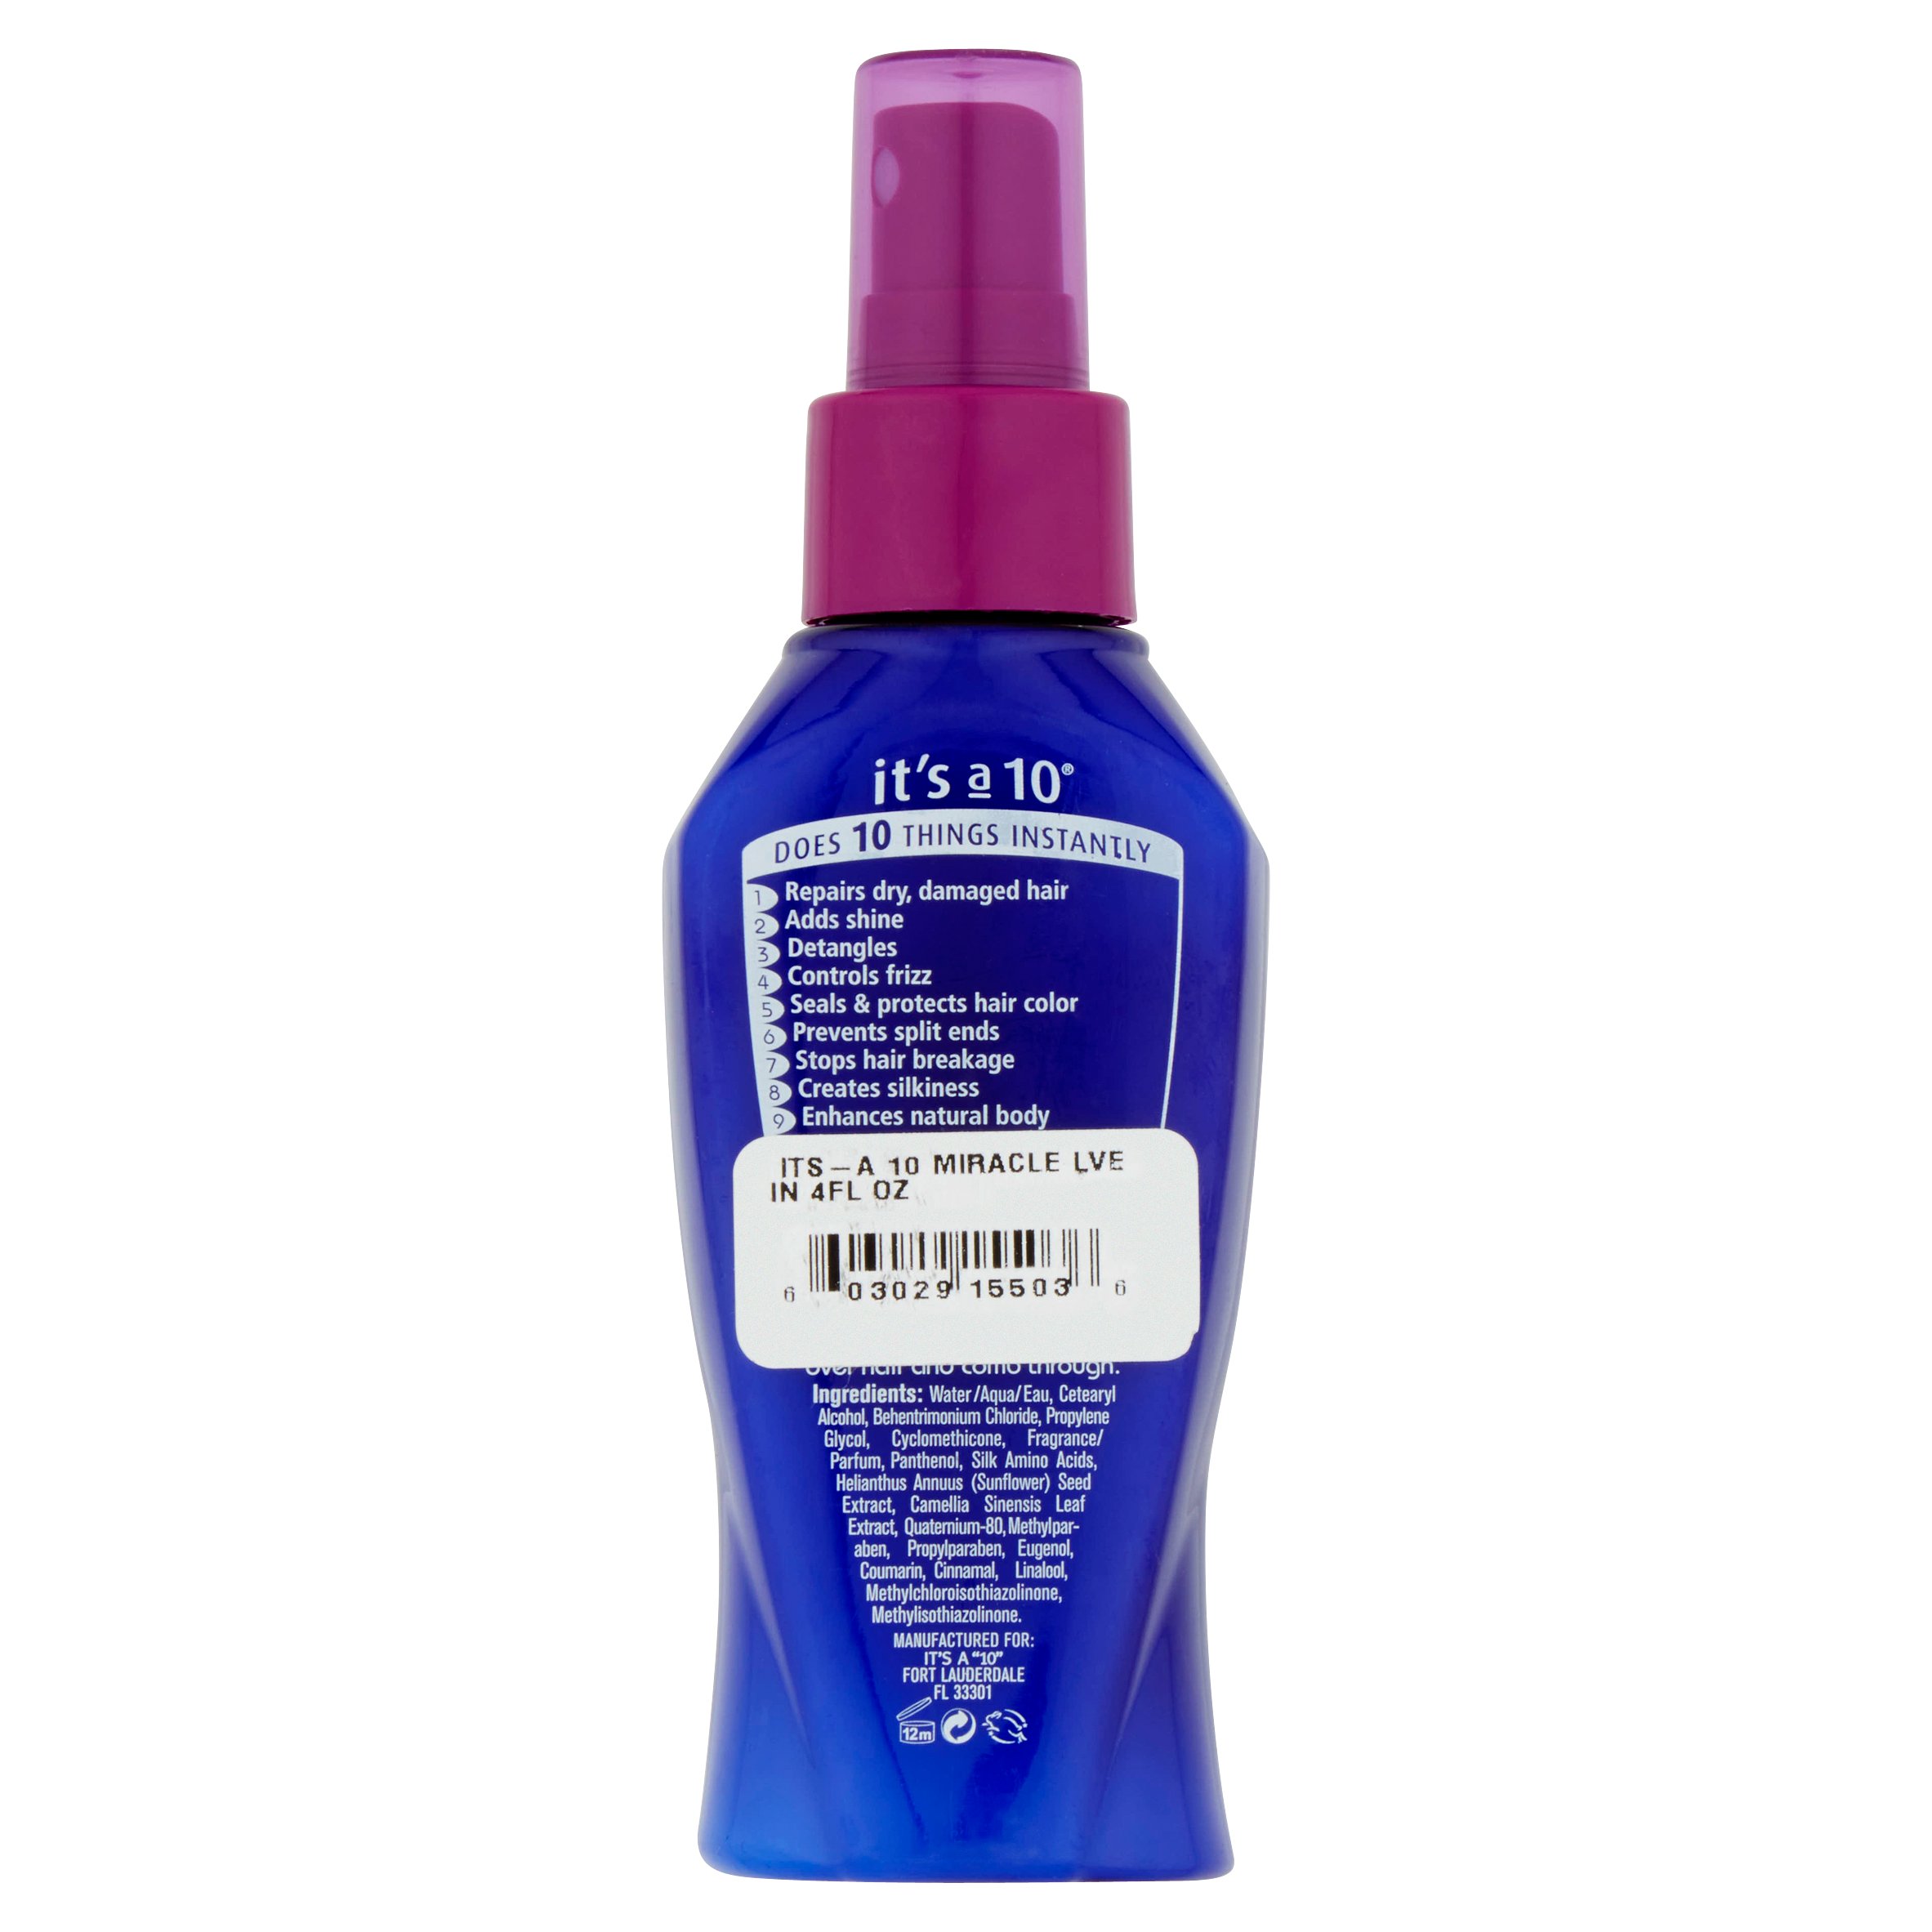 It's a 10 Miracle Frizz Control Shine Enhancing Leave-in Conditioner, 4 fl oz - image 4 of 5